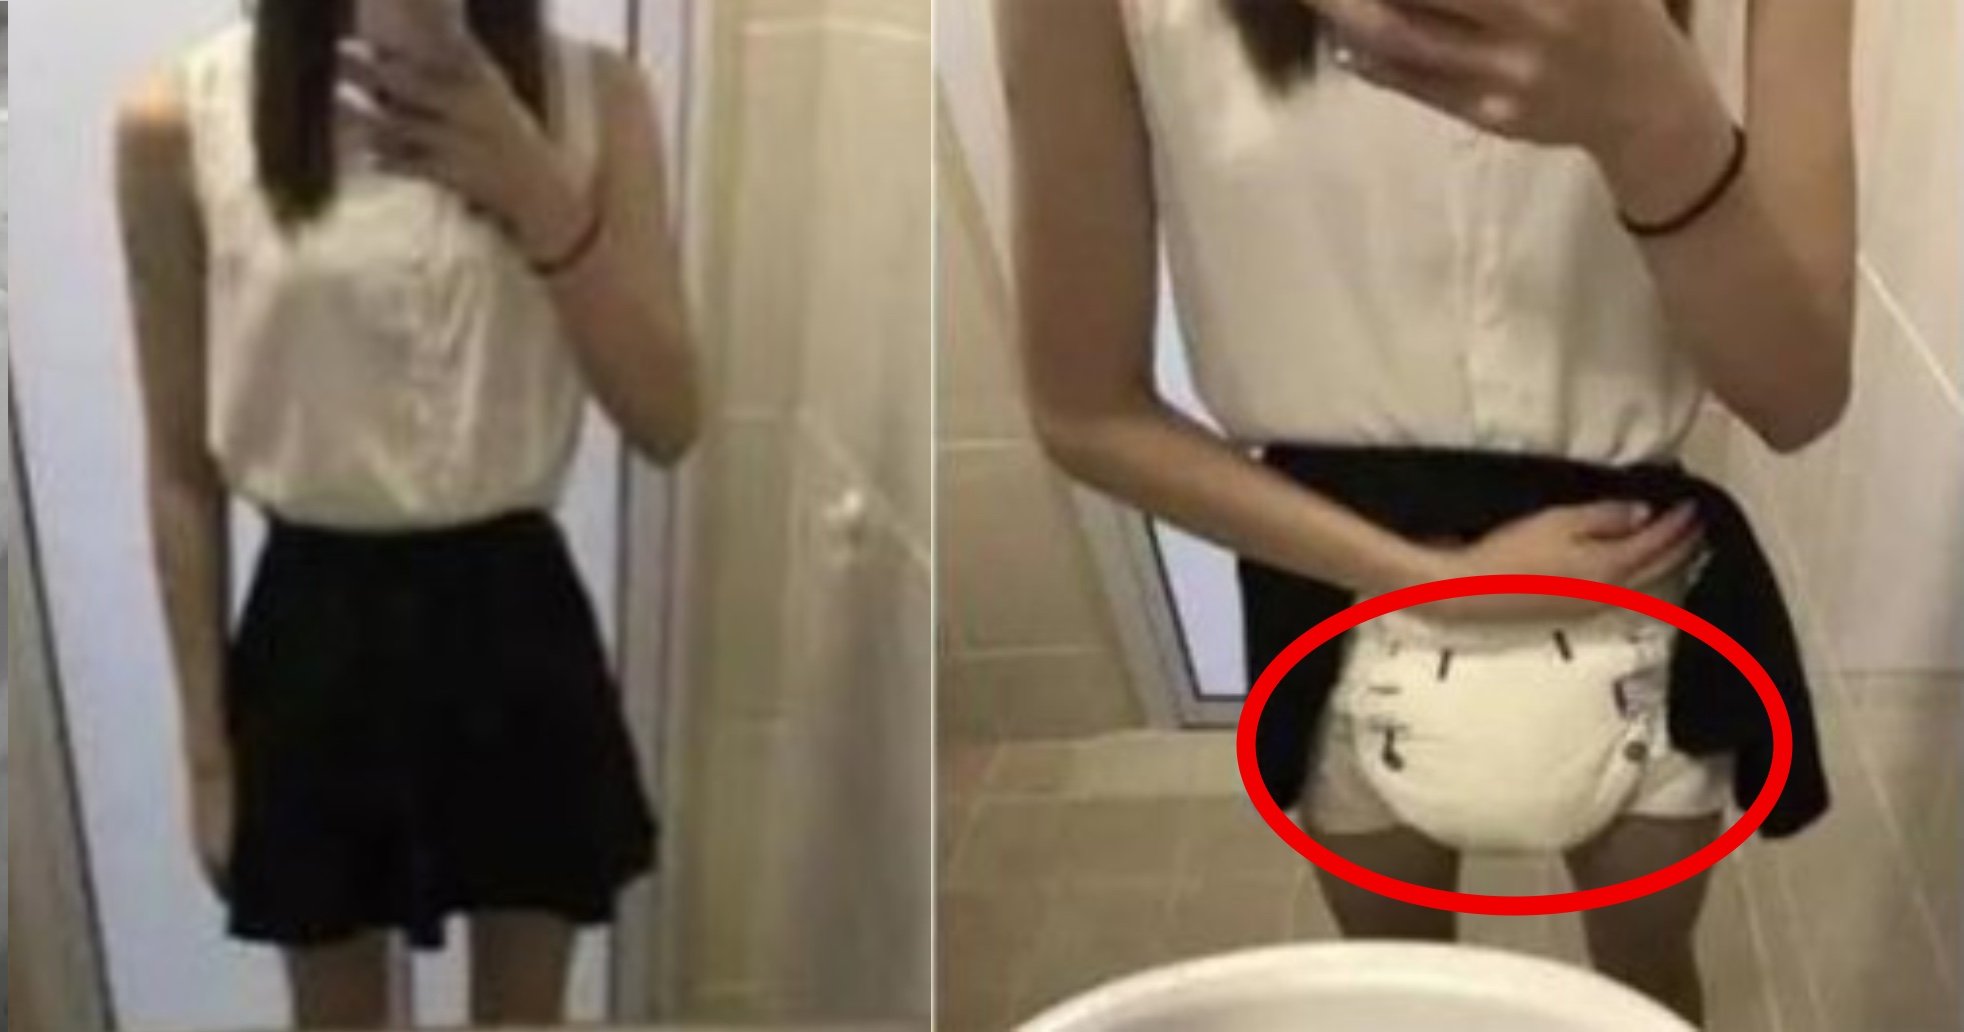 diaper.jpg?resize=412,232 - 19-Year-Old Girl Who Has To Wear A Diaper Every Day Shares Her Story Of Regret